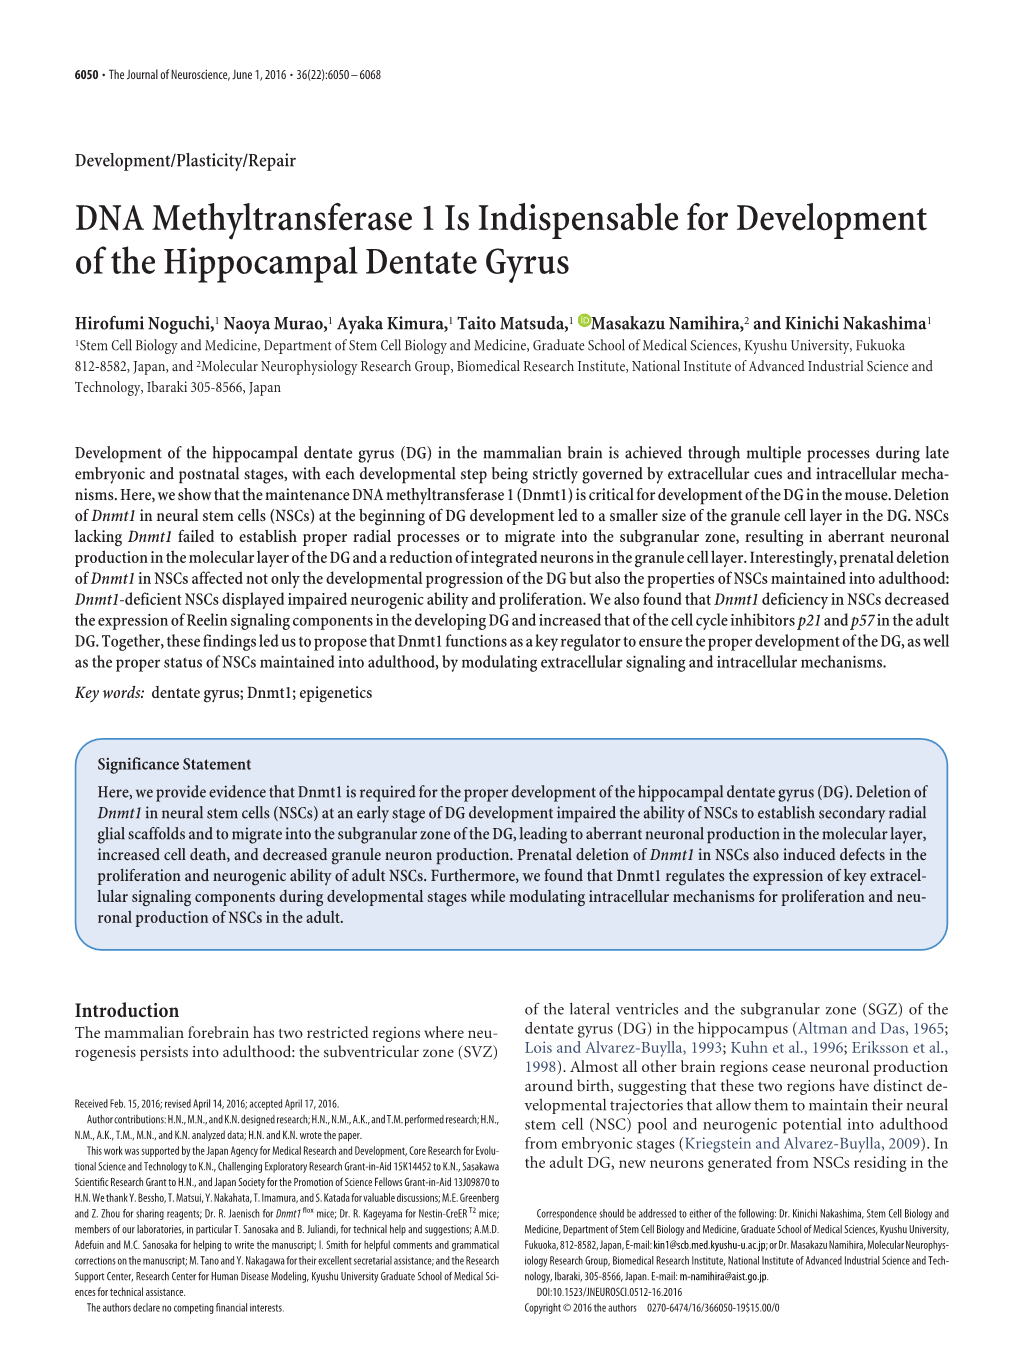 DNA Methyltransferase 1 Is Indispensable for Development of the Hippocampal Dentate Gyrus